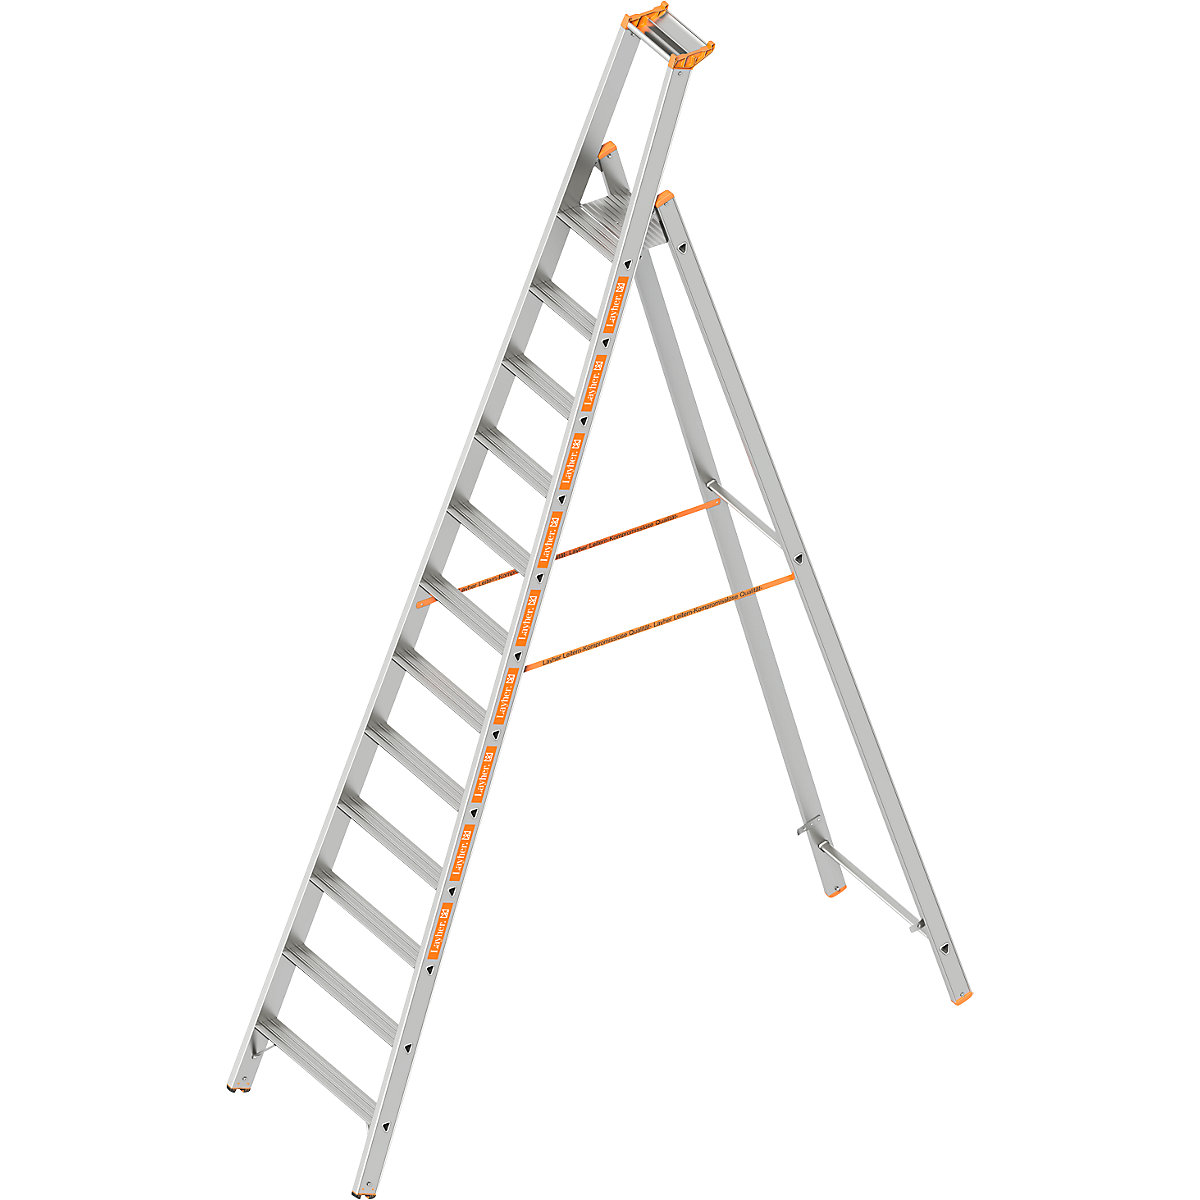 Step ladder – Layher, single sided access, 12 steps incl. platform-9